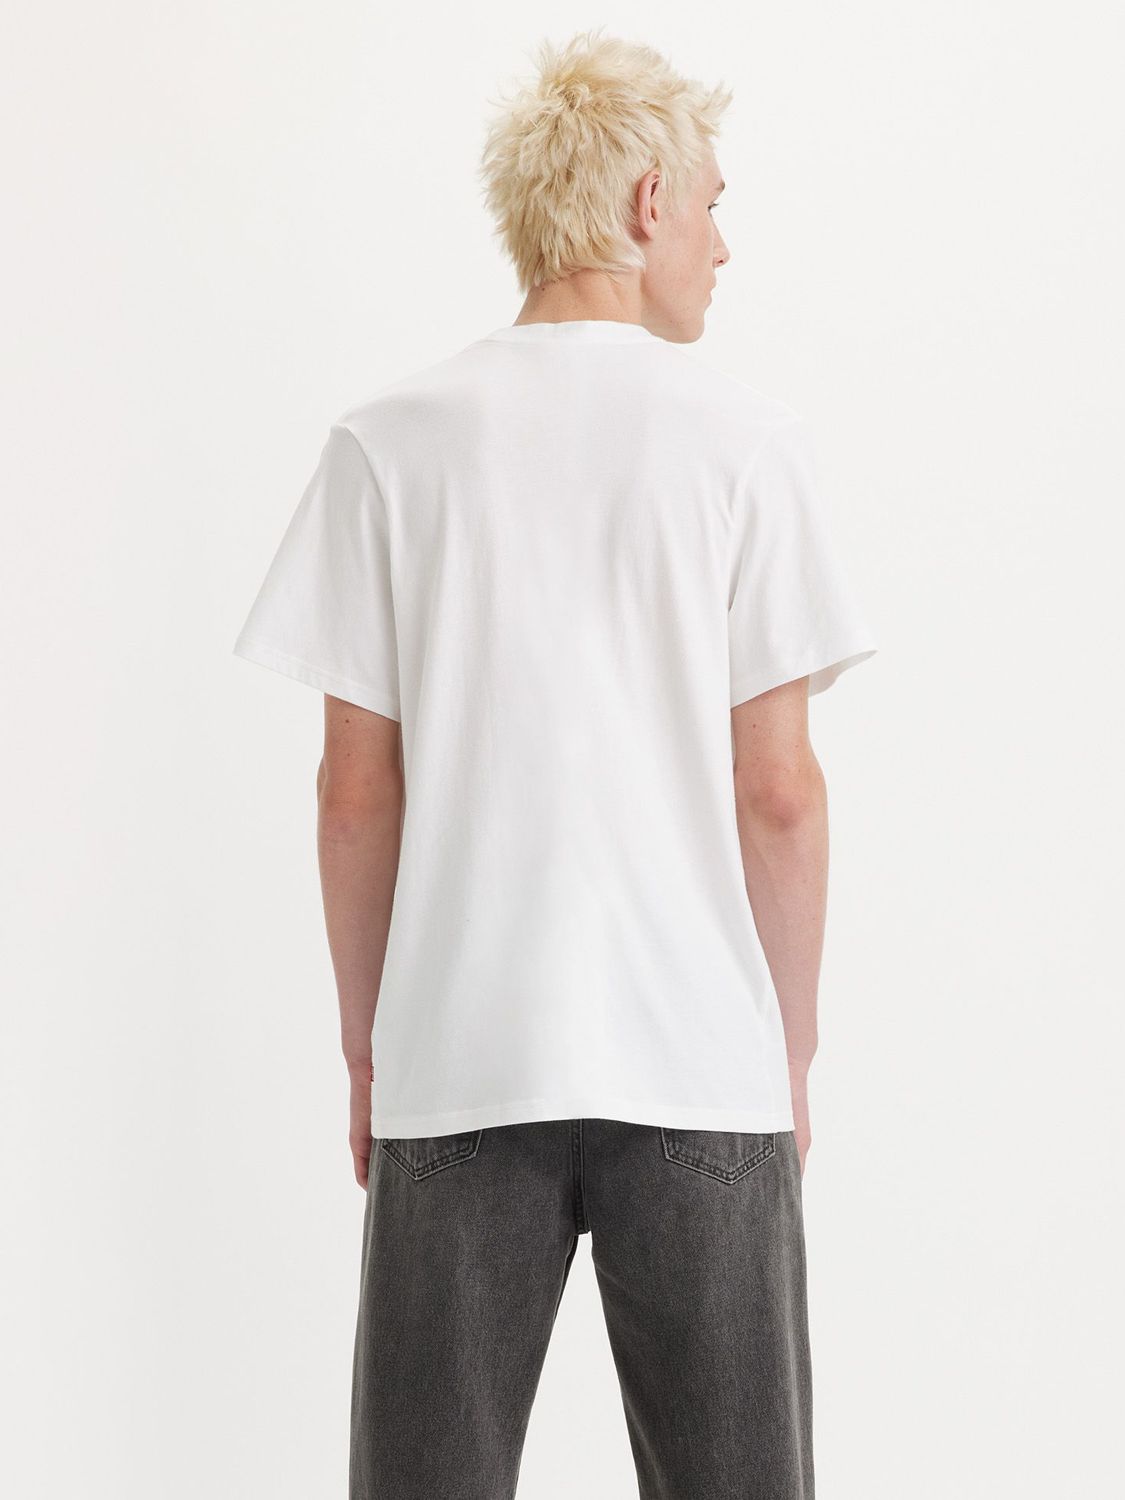 Buy Levi's Short Sleeve Relaxed Fit T-Shirt, Chrome White Online at johnlewis.com